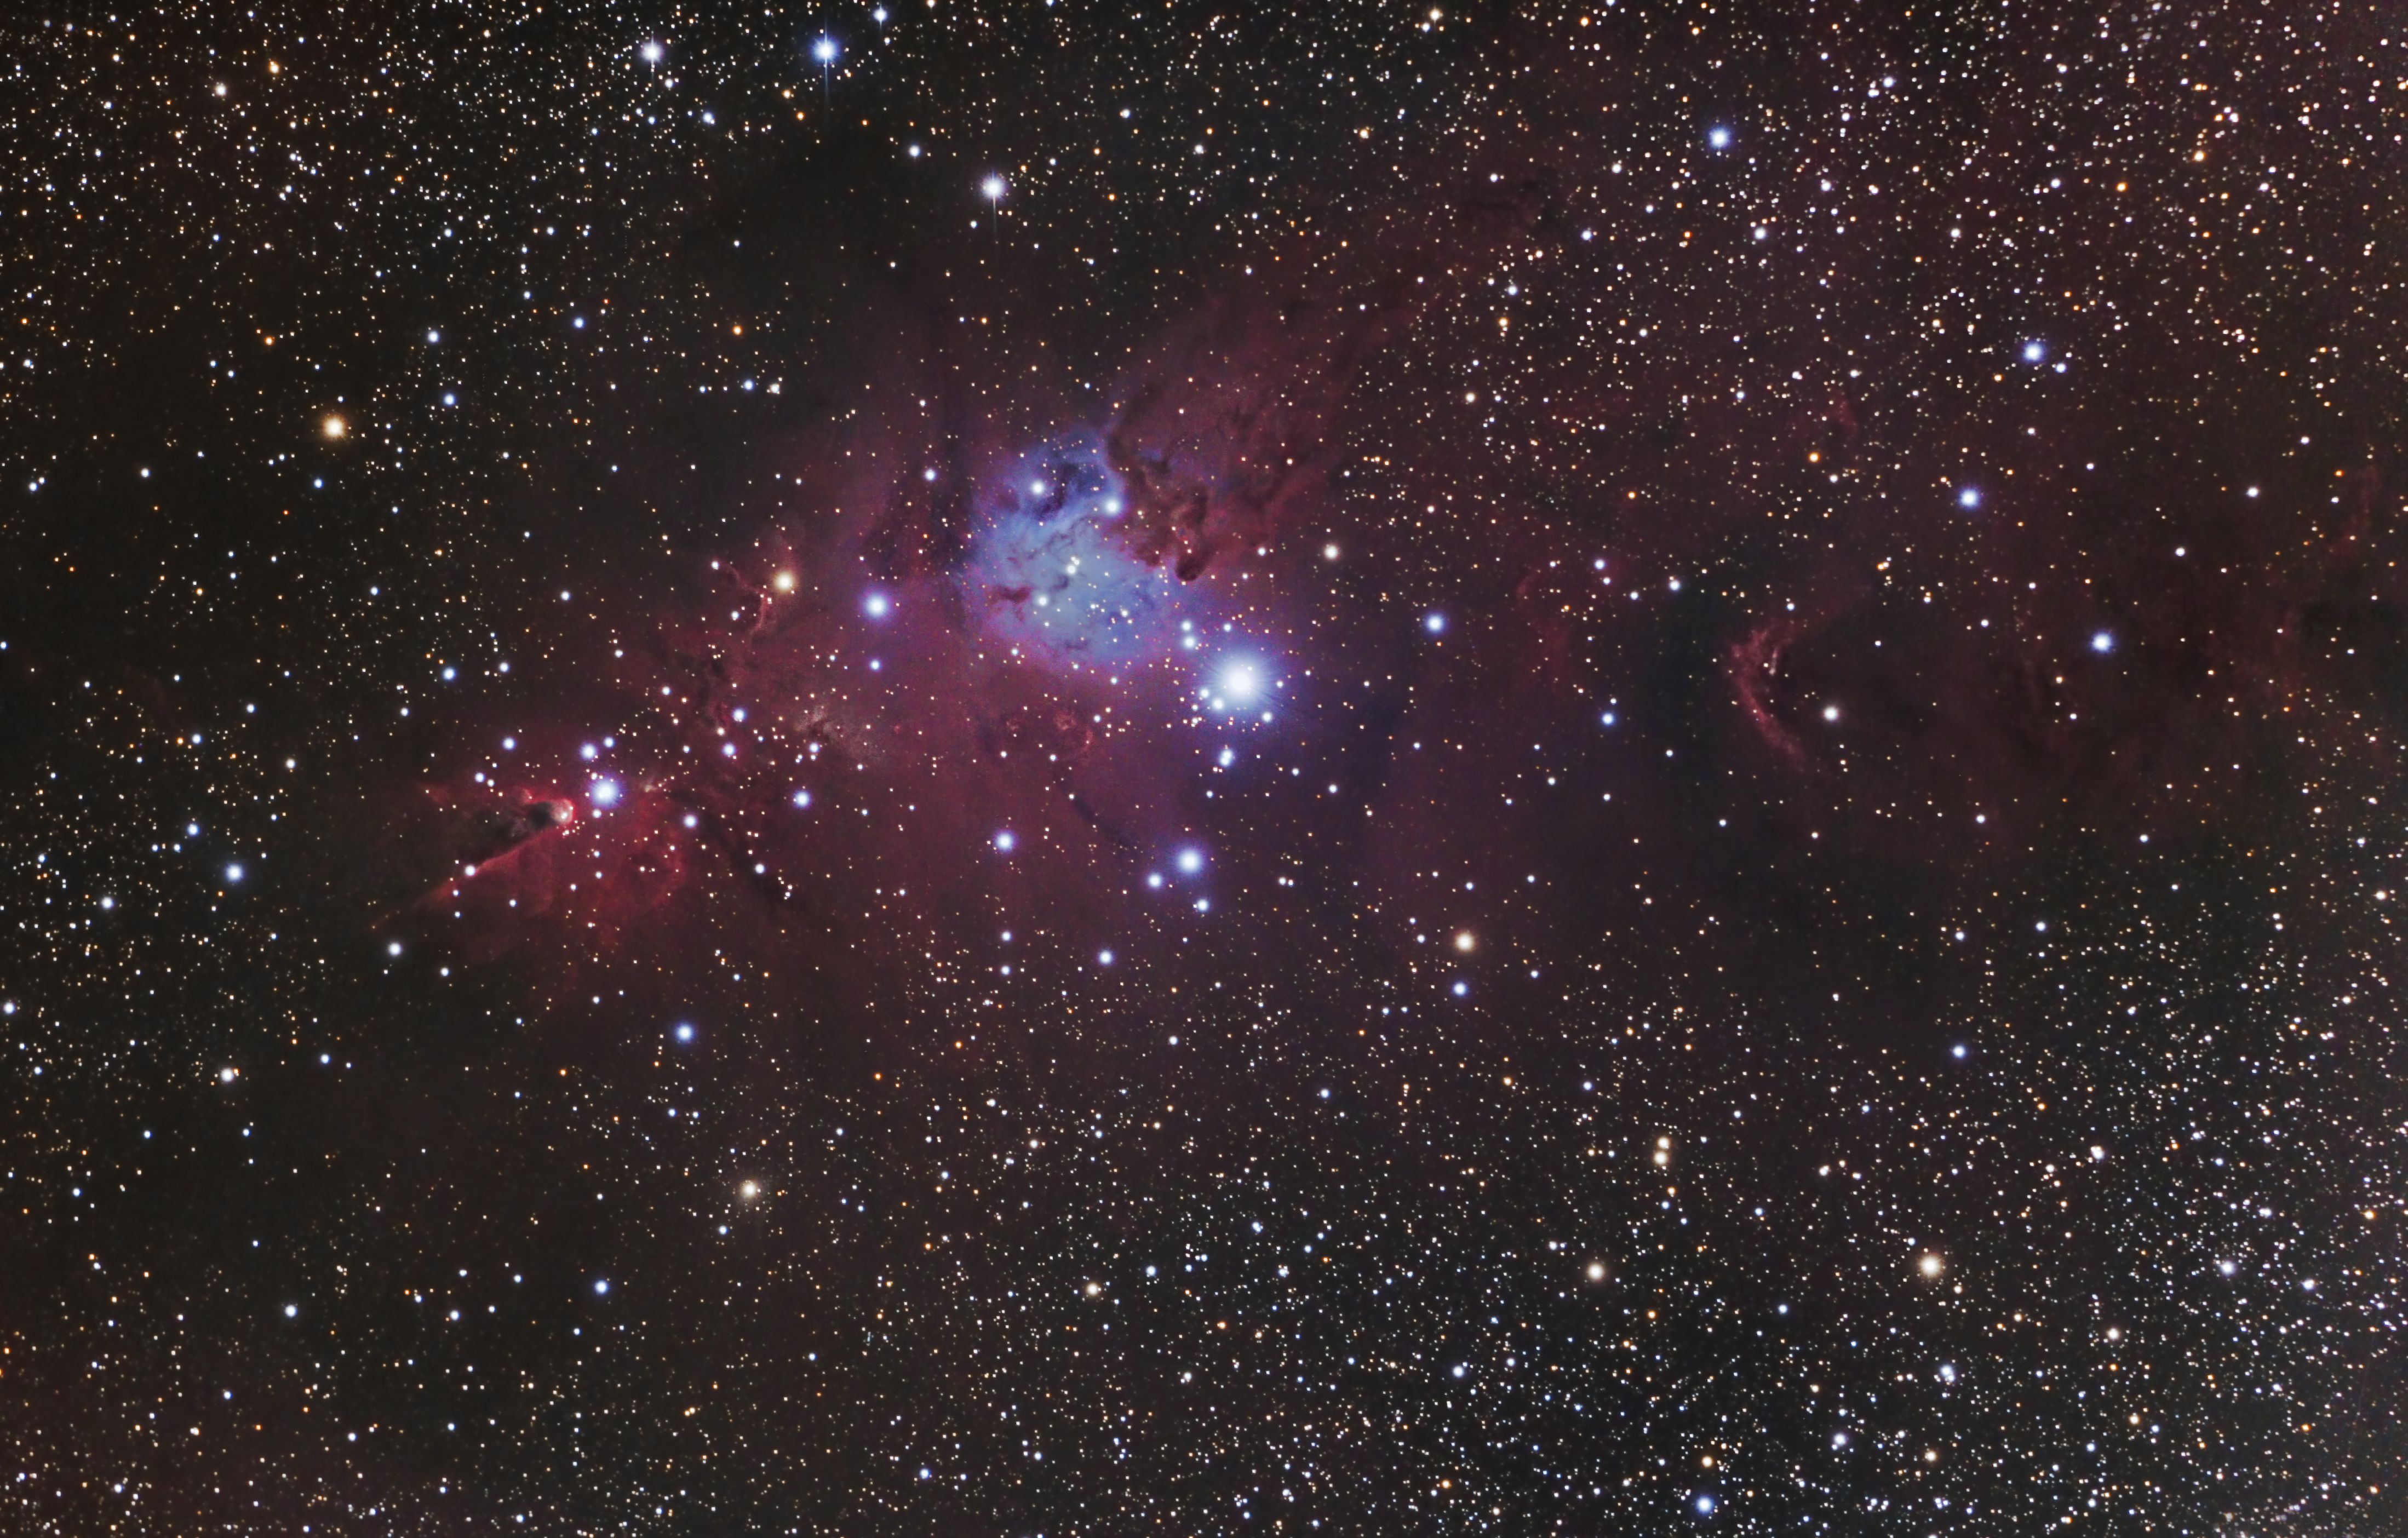 Christmas Tree Cluster or NGC 2264 at US Store